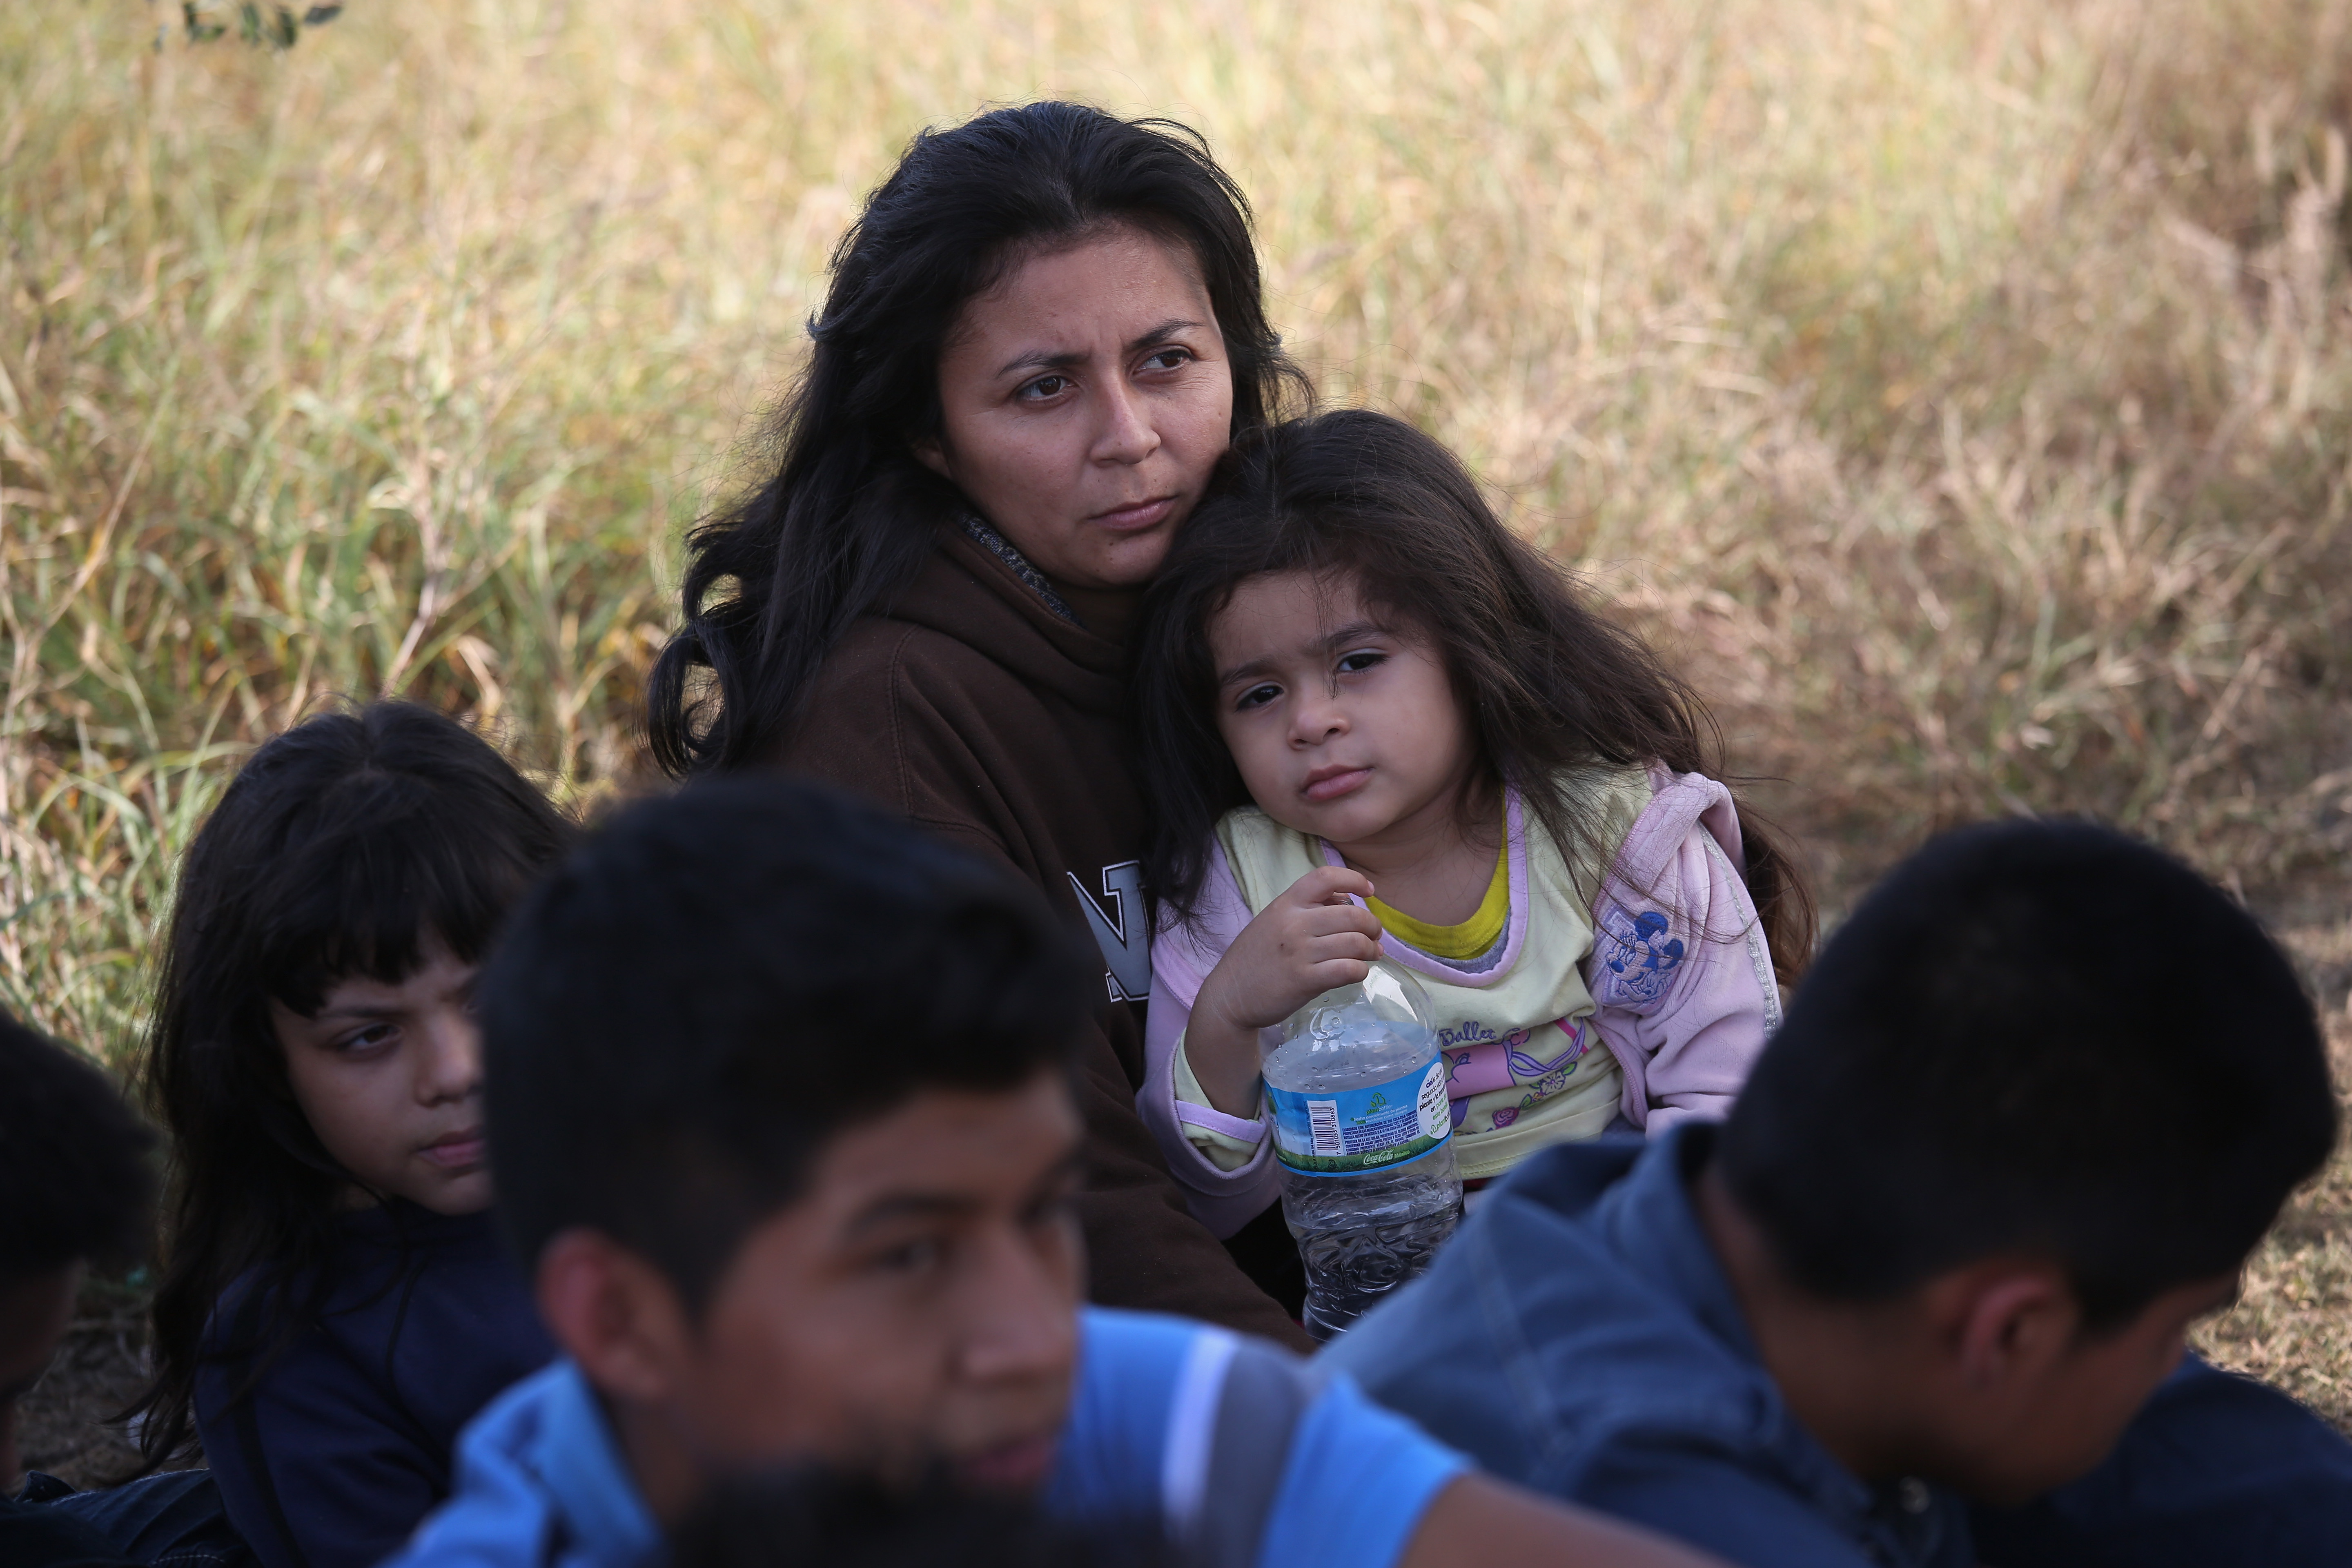 U.S. plans to deport some immigrant families who crossed southern border - CBS News